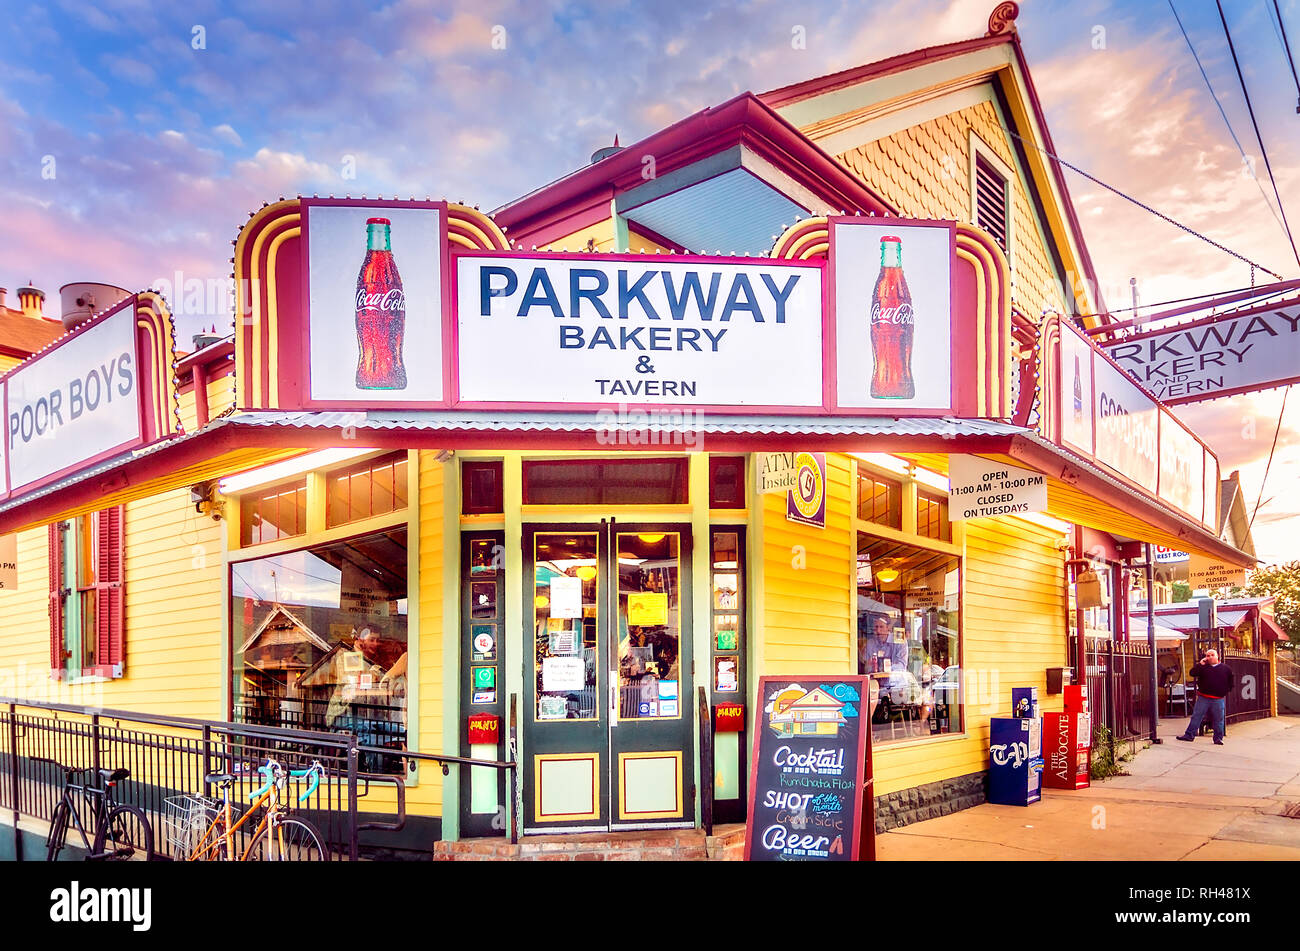 Parkway Bakery & Tavern is pictured at sunset, Nov. 12, 2015, in New Orleans, Louisiana. Parkway was founded in 1911 and is known for its po’ boys. Stock Photo